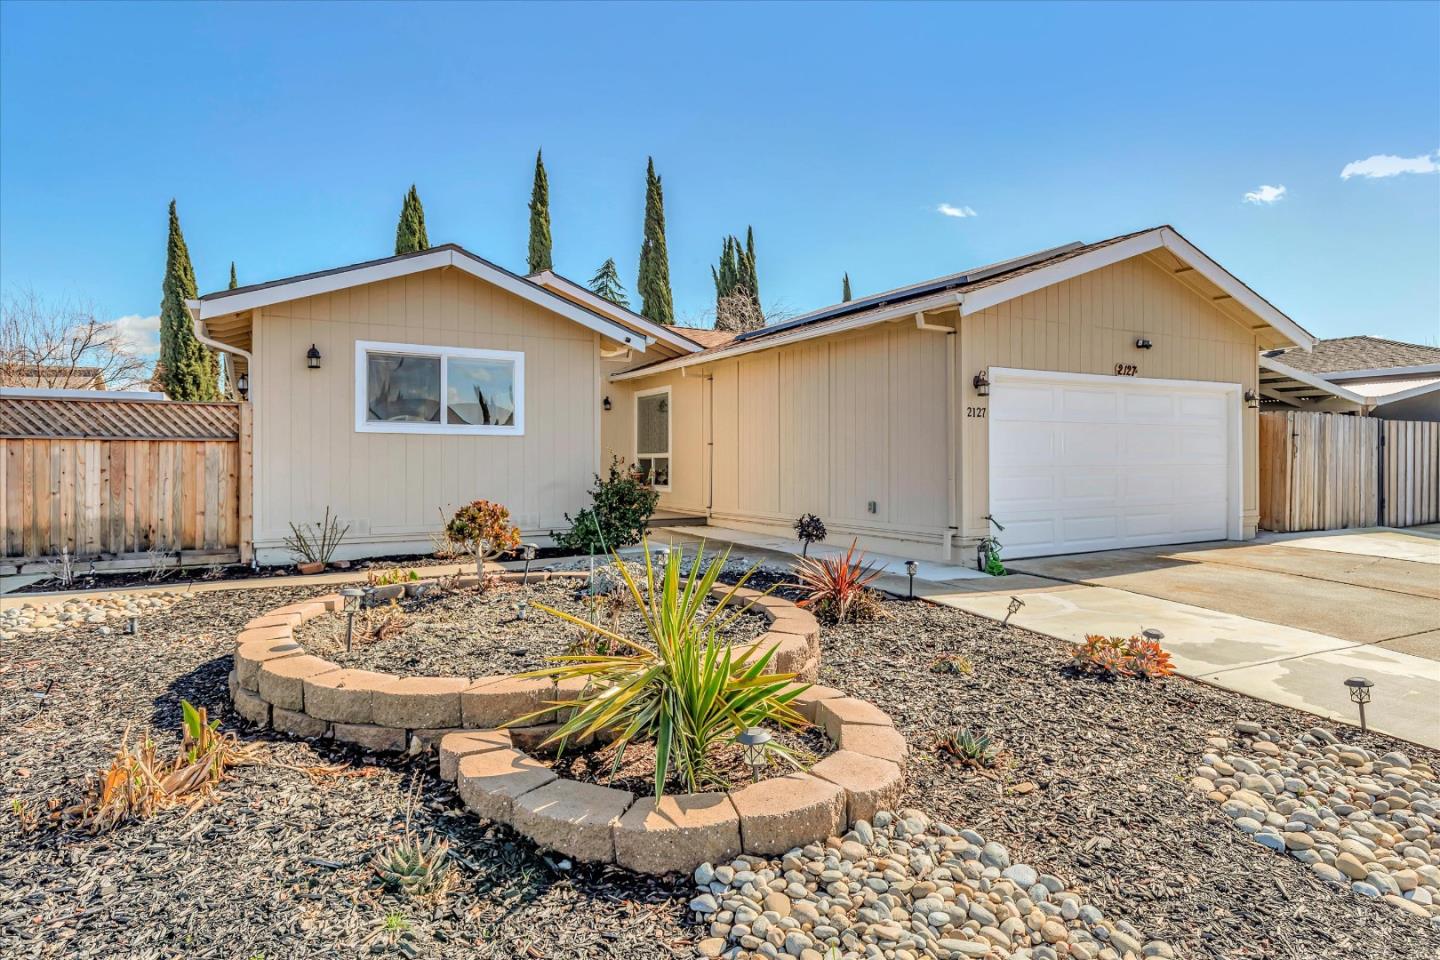 Photo of 2127 Shetland Rd in Livermore, CA